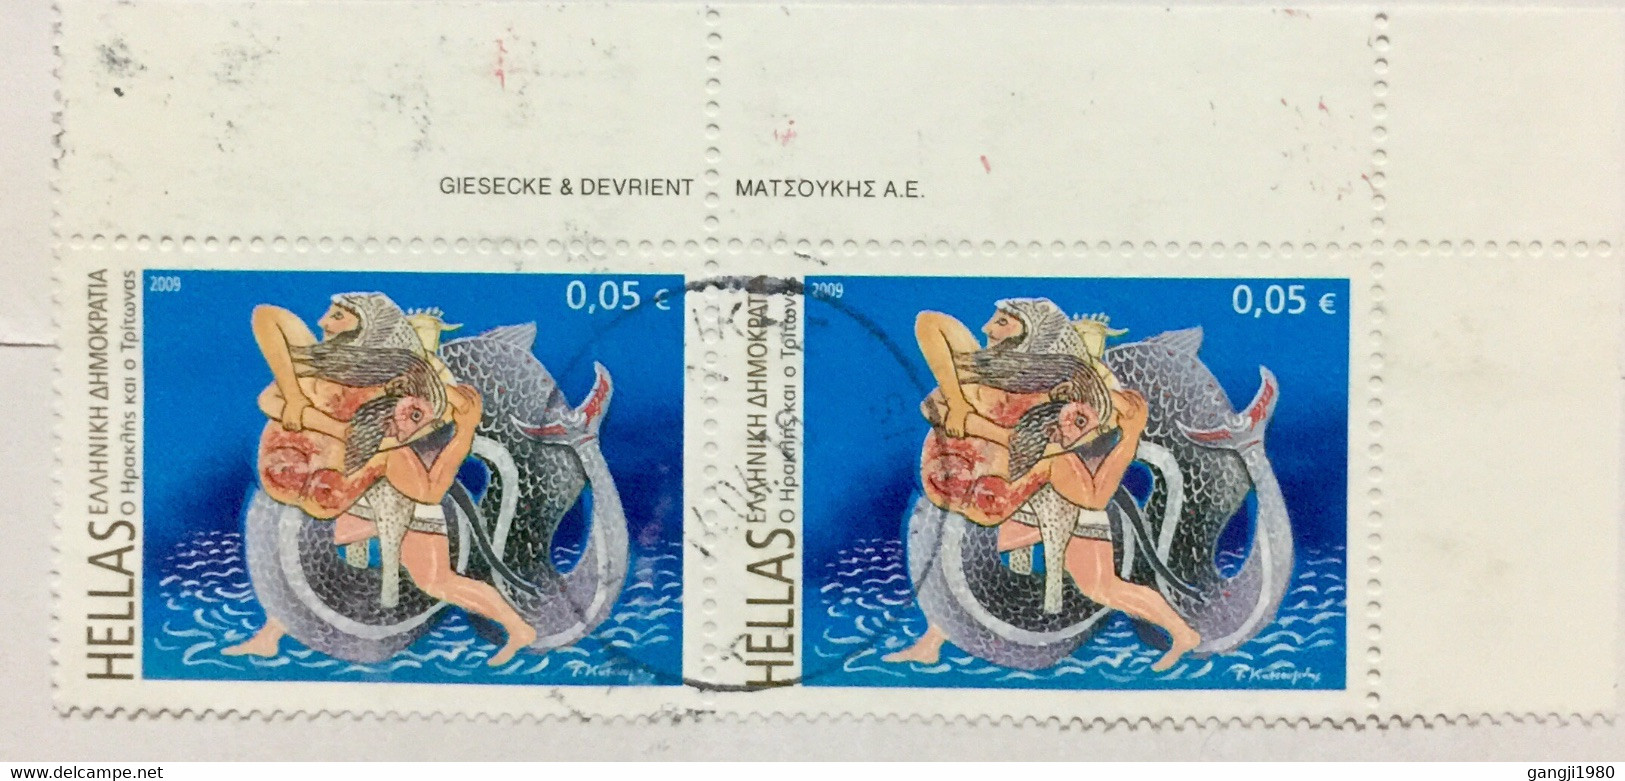 GREECE 2009, USED 4 STAMPS REGISTERED COVER TO U.K ,SHIP BALLON ,EUROPA,ART ,FISH,MAN ,WOMEN,PAINTING ART ,SEA ,WATER ,T - Storia Postale